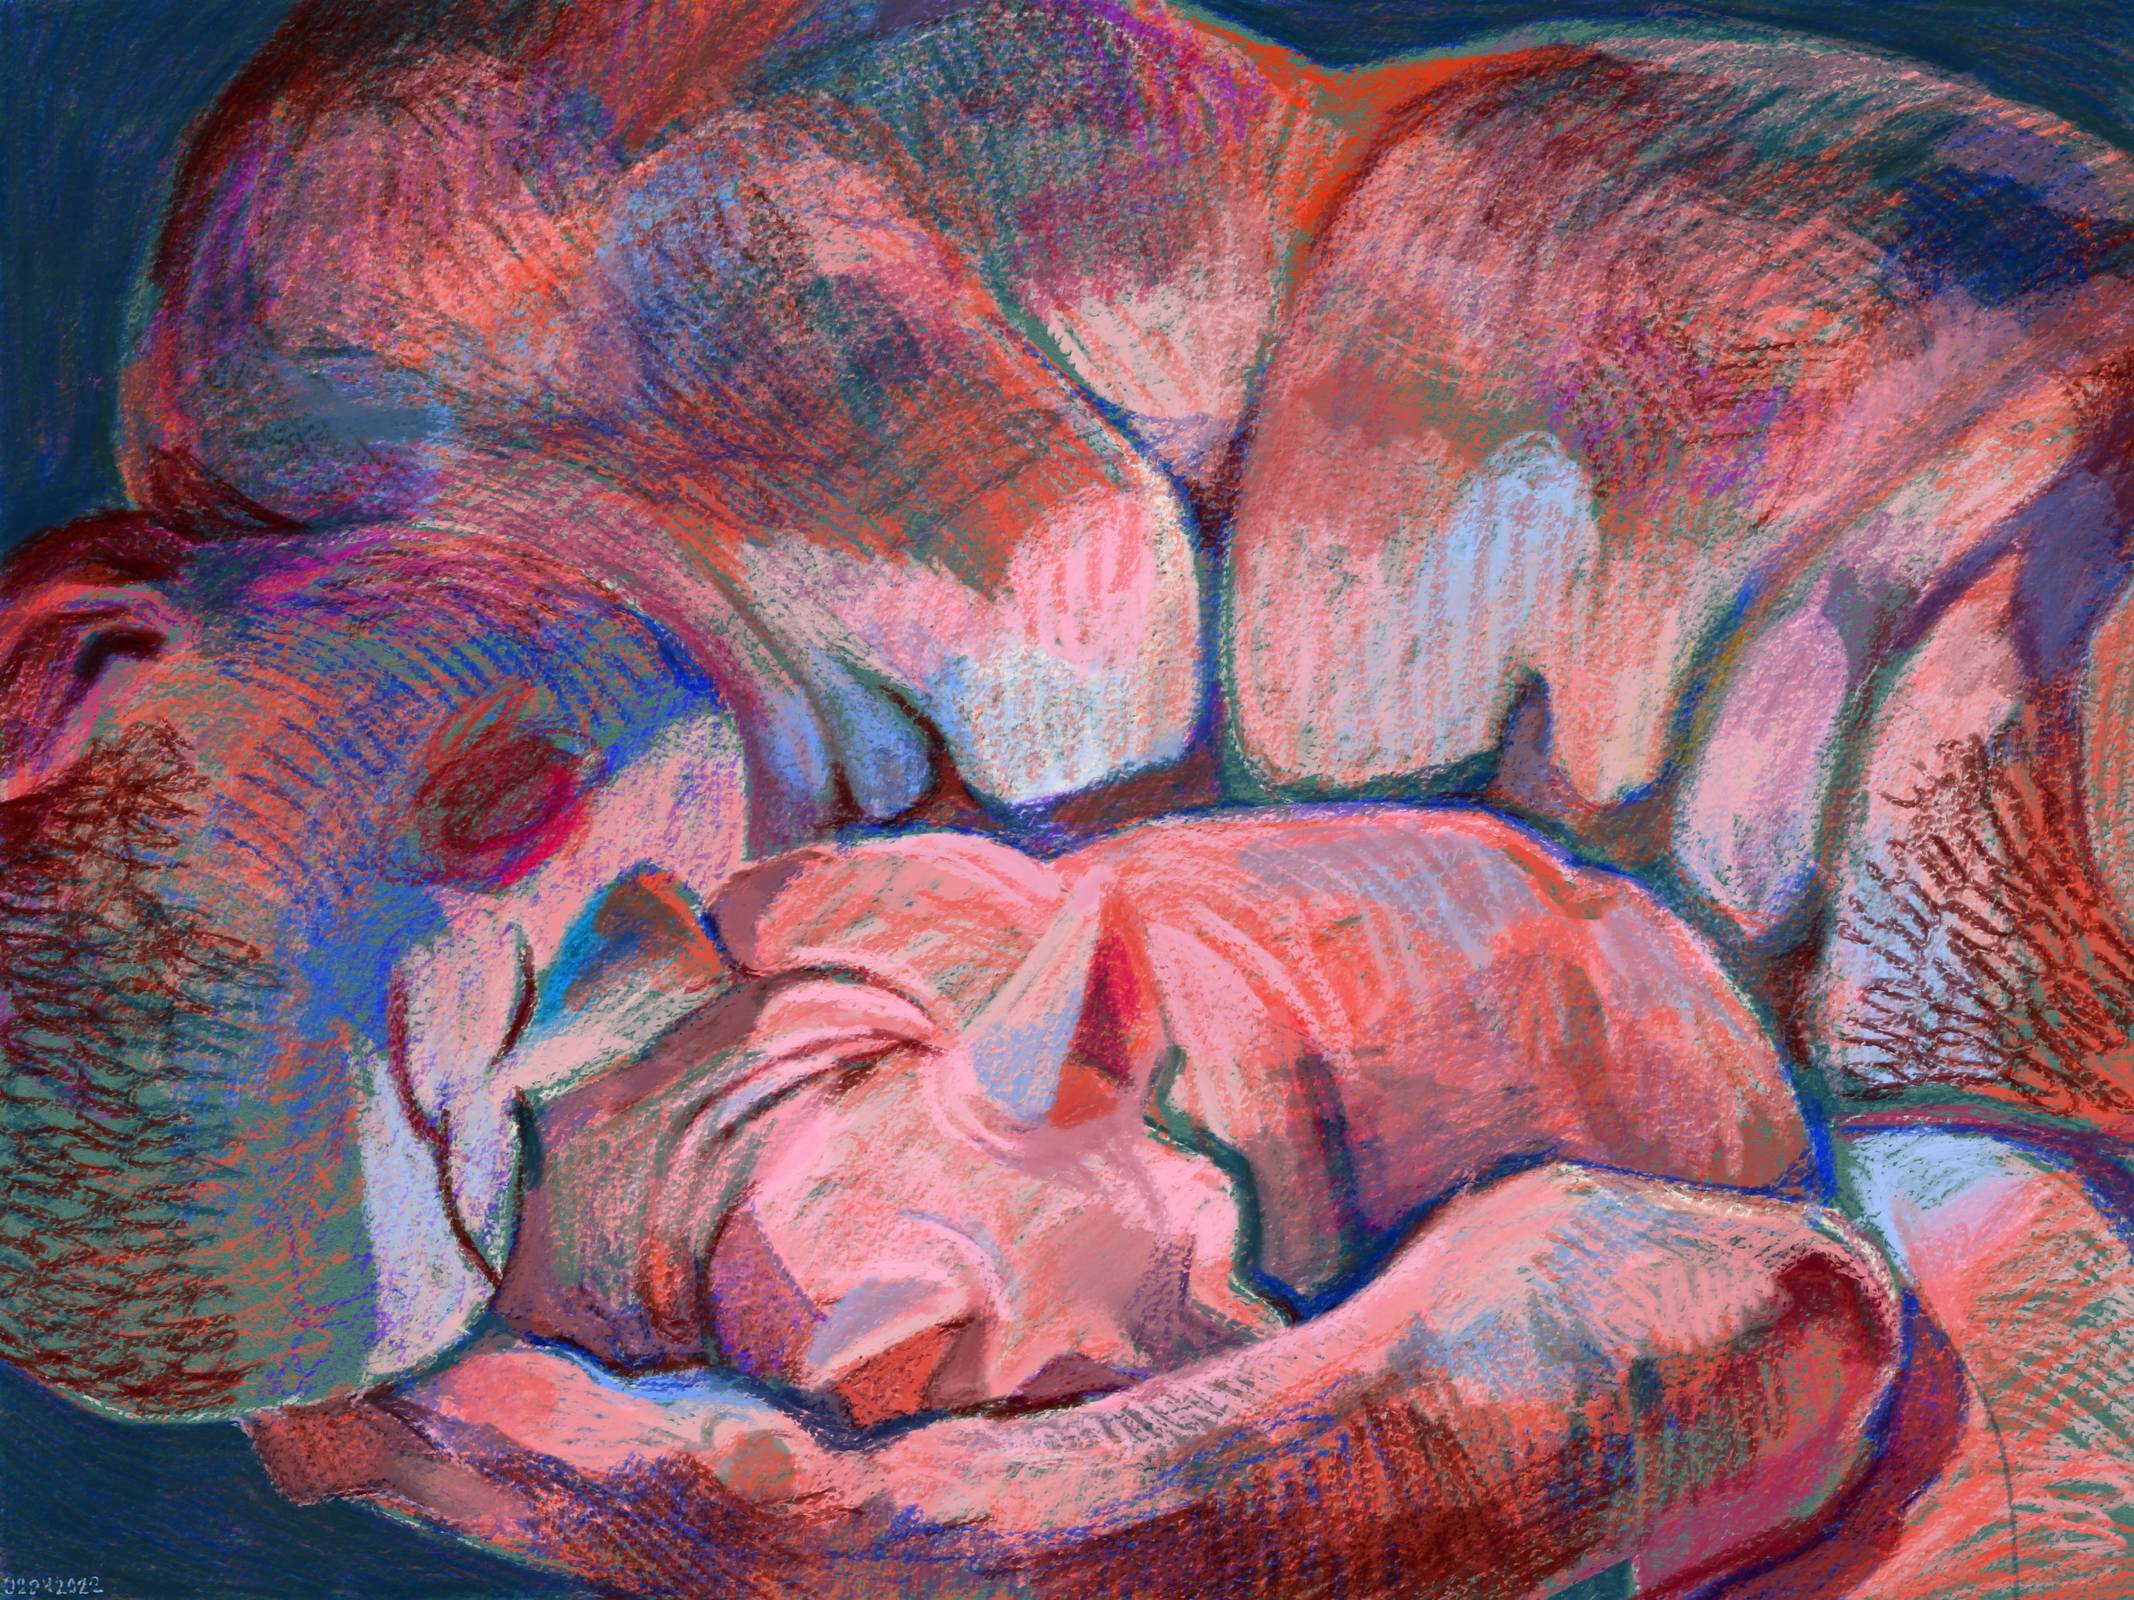 A colored drawing with a crayonlike texture and warm, orange, red tones. It features a naked person with closed eyes, curled around a hairless cat. The mood is calm